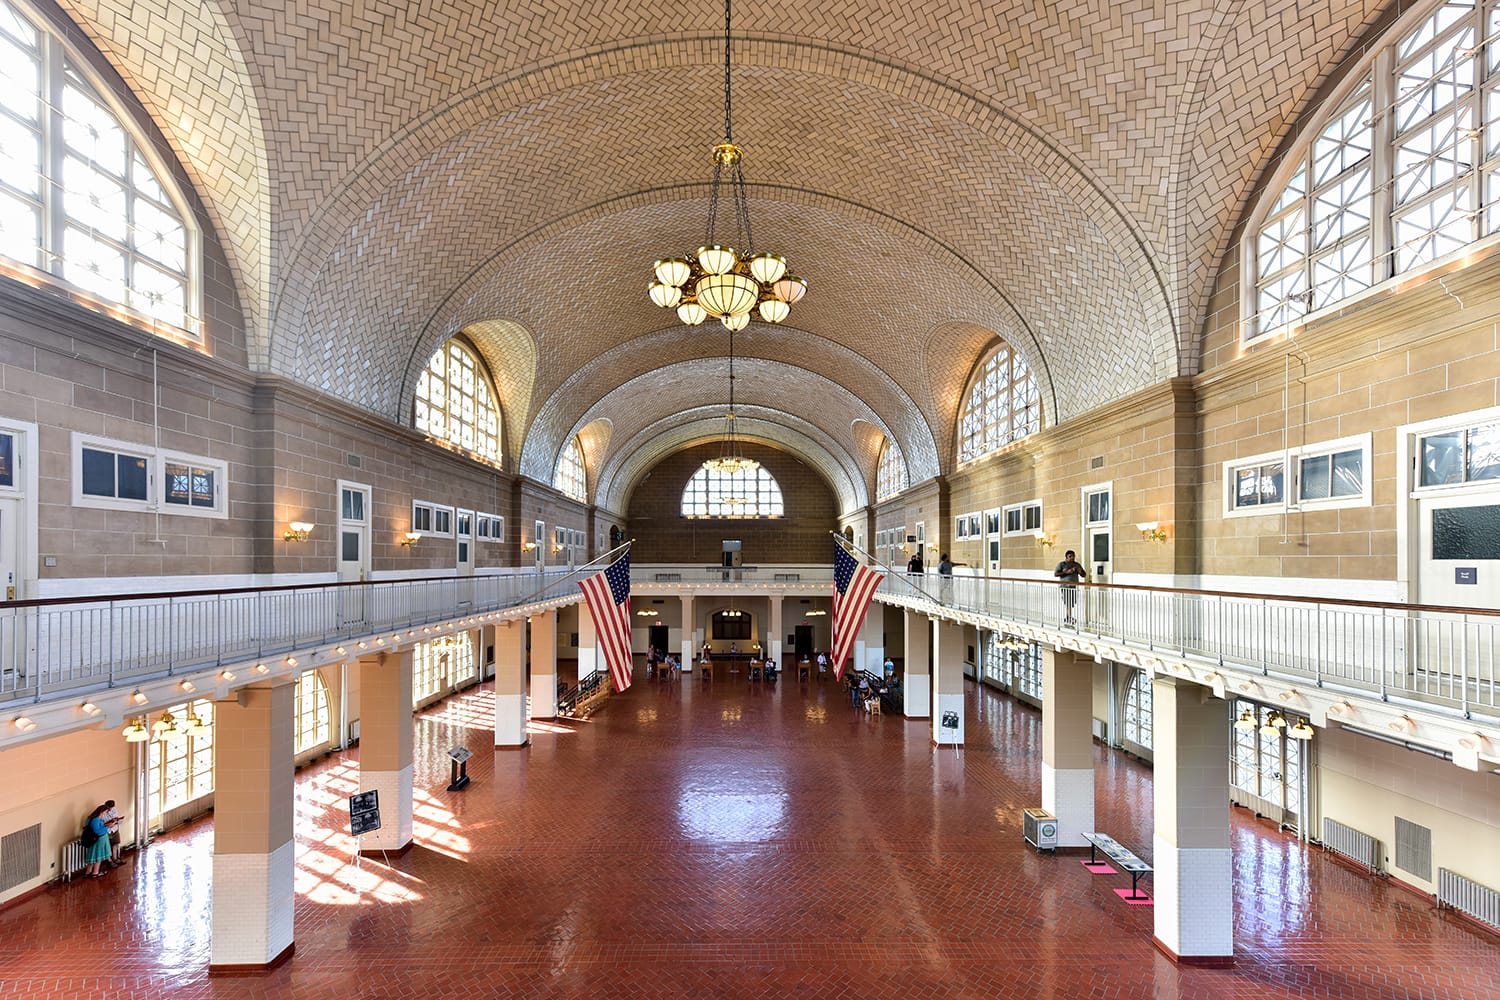 The Registry Room or "Great Hall" at Ellis Island National Park in New York